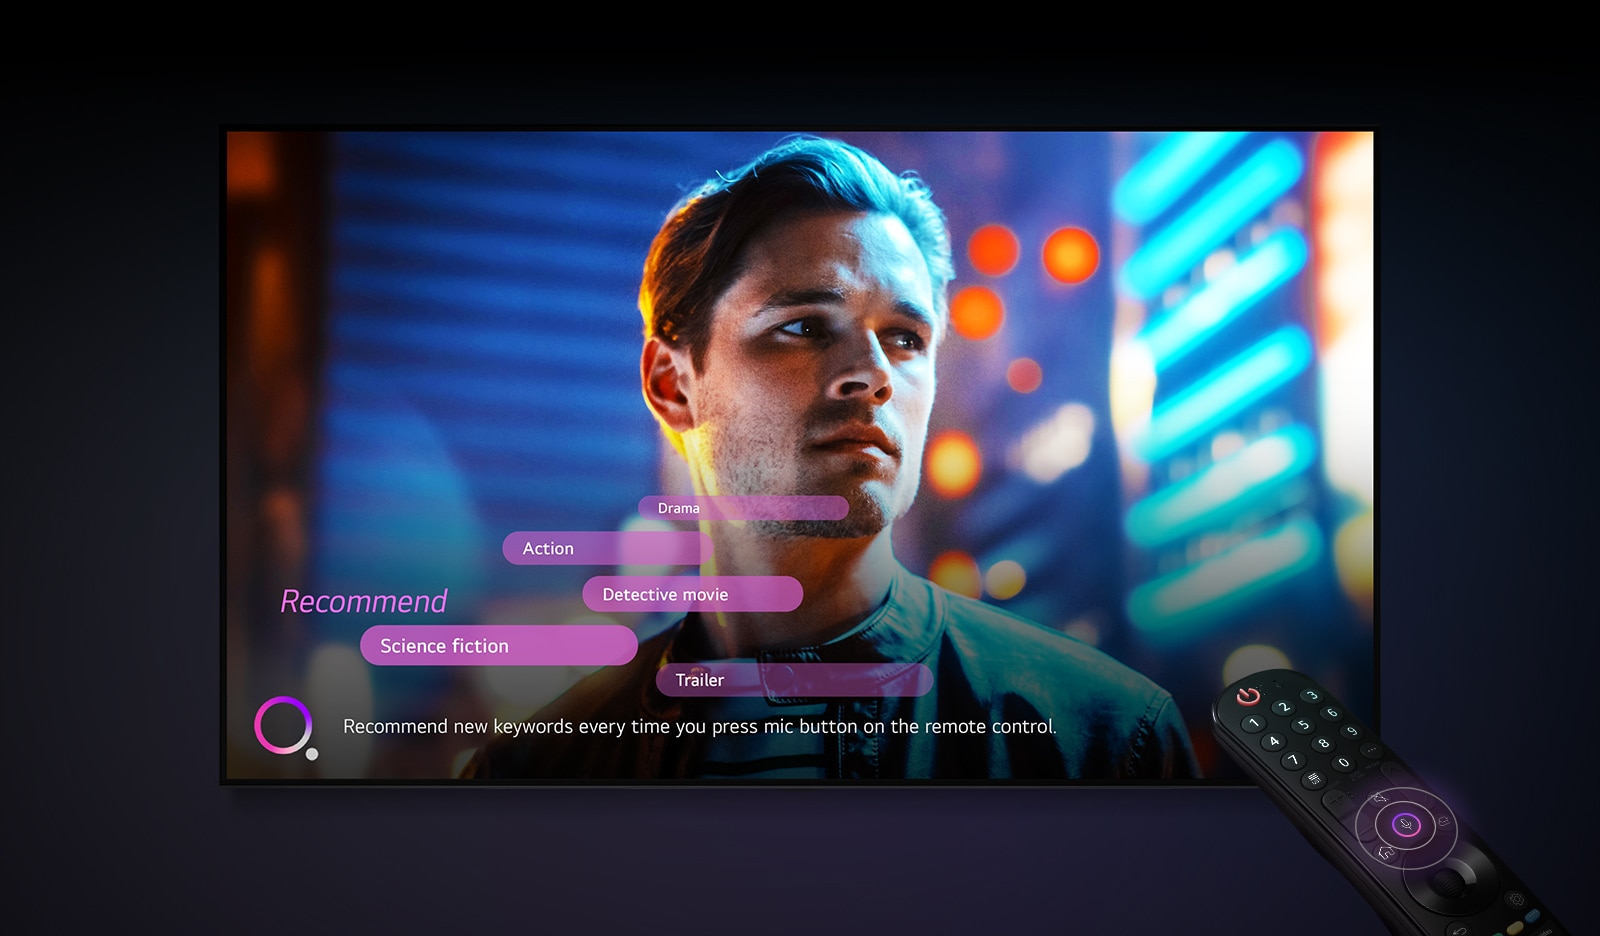 The TV screen shows a man's face and suggested search terms appear nearby.